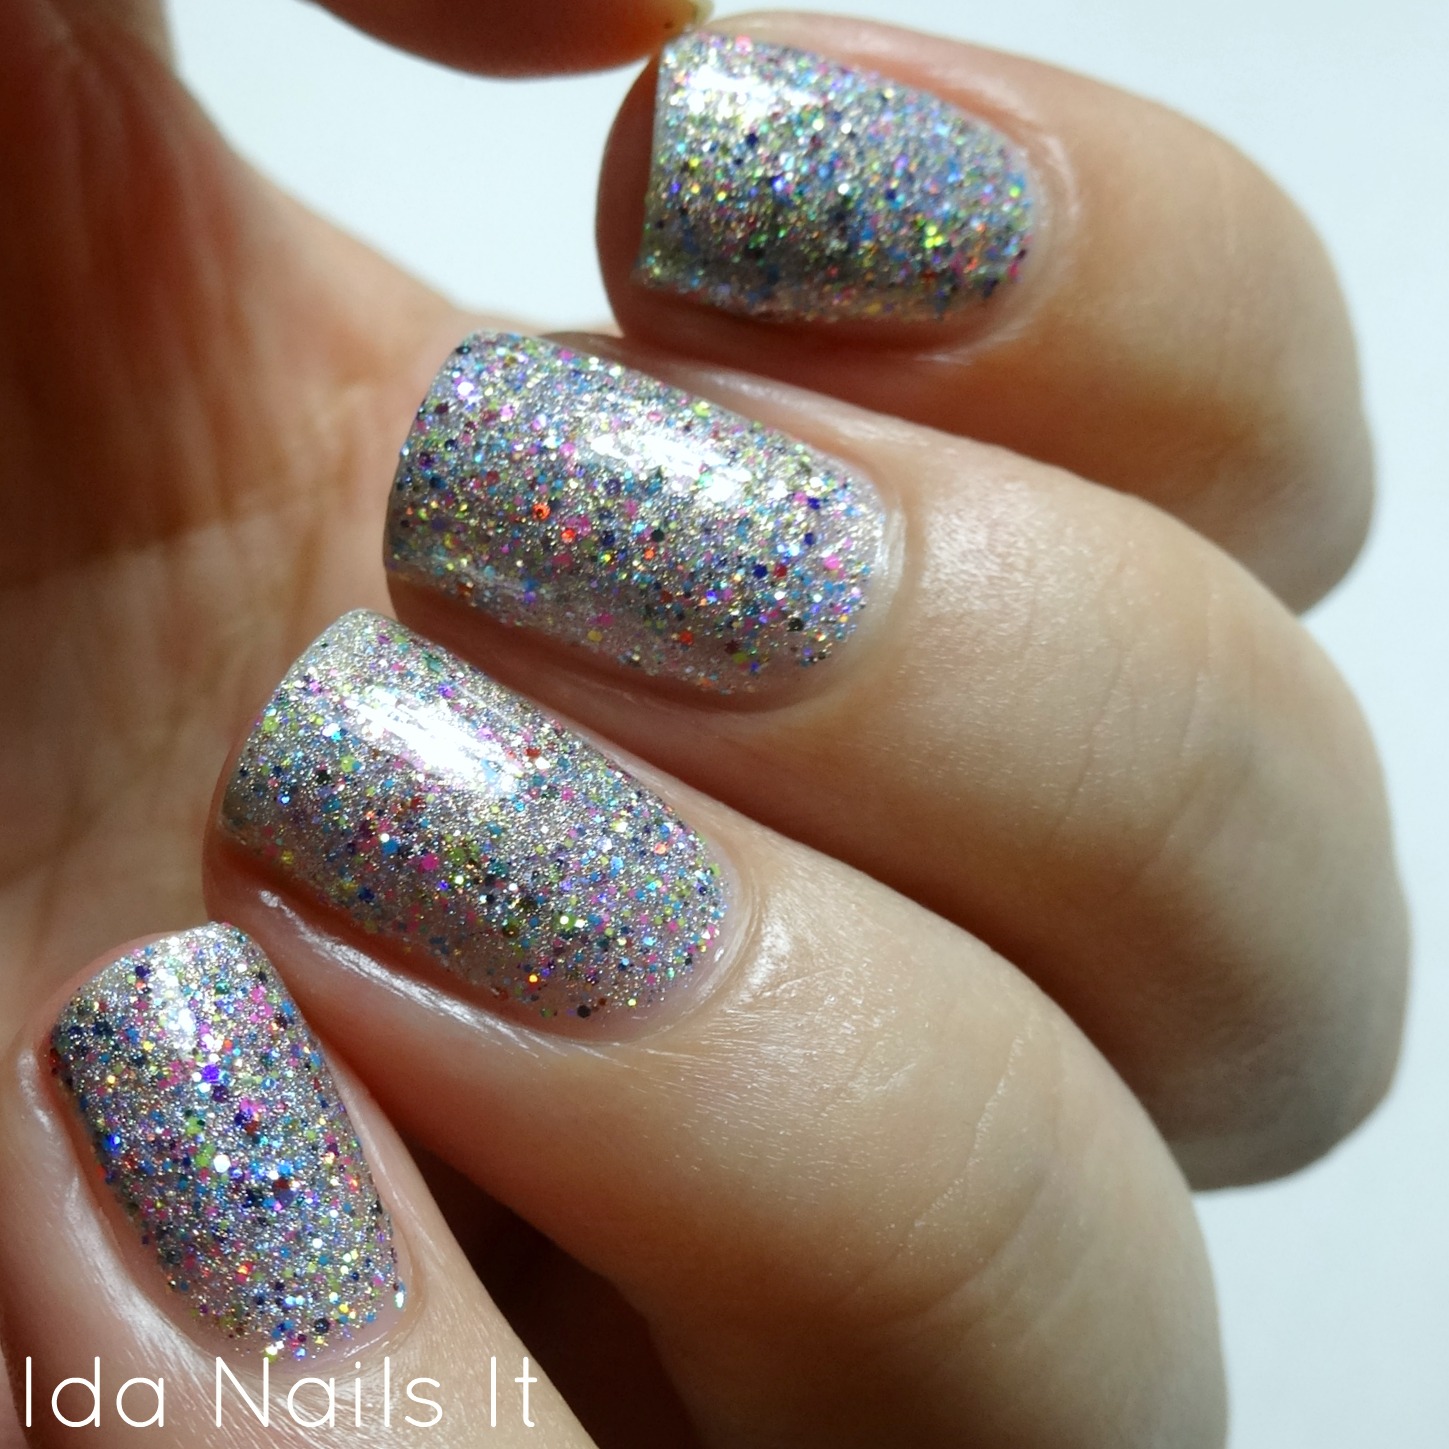 Ida Nails It: Glam Polish It’s Only A Dream Alice (Partial) Collection